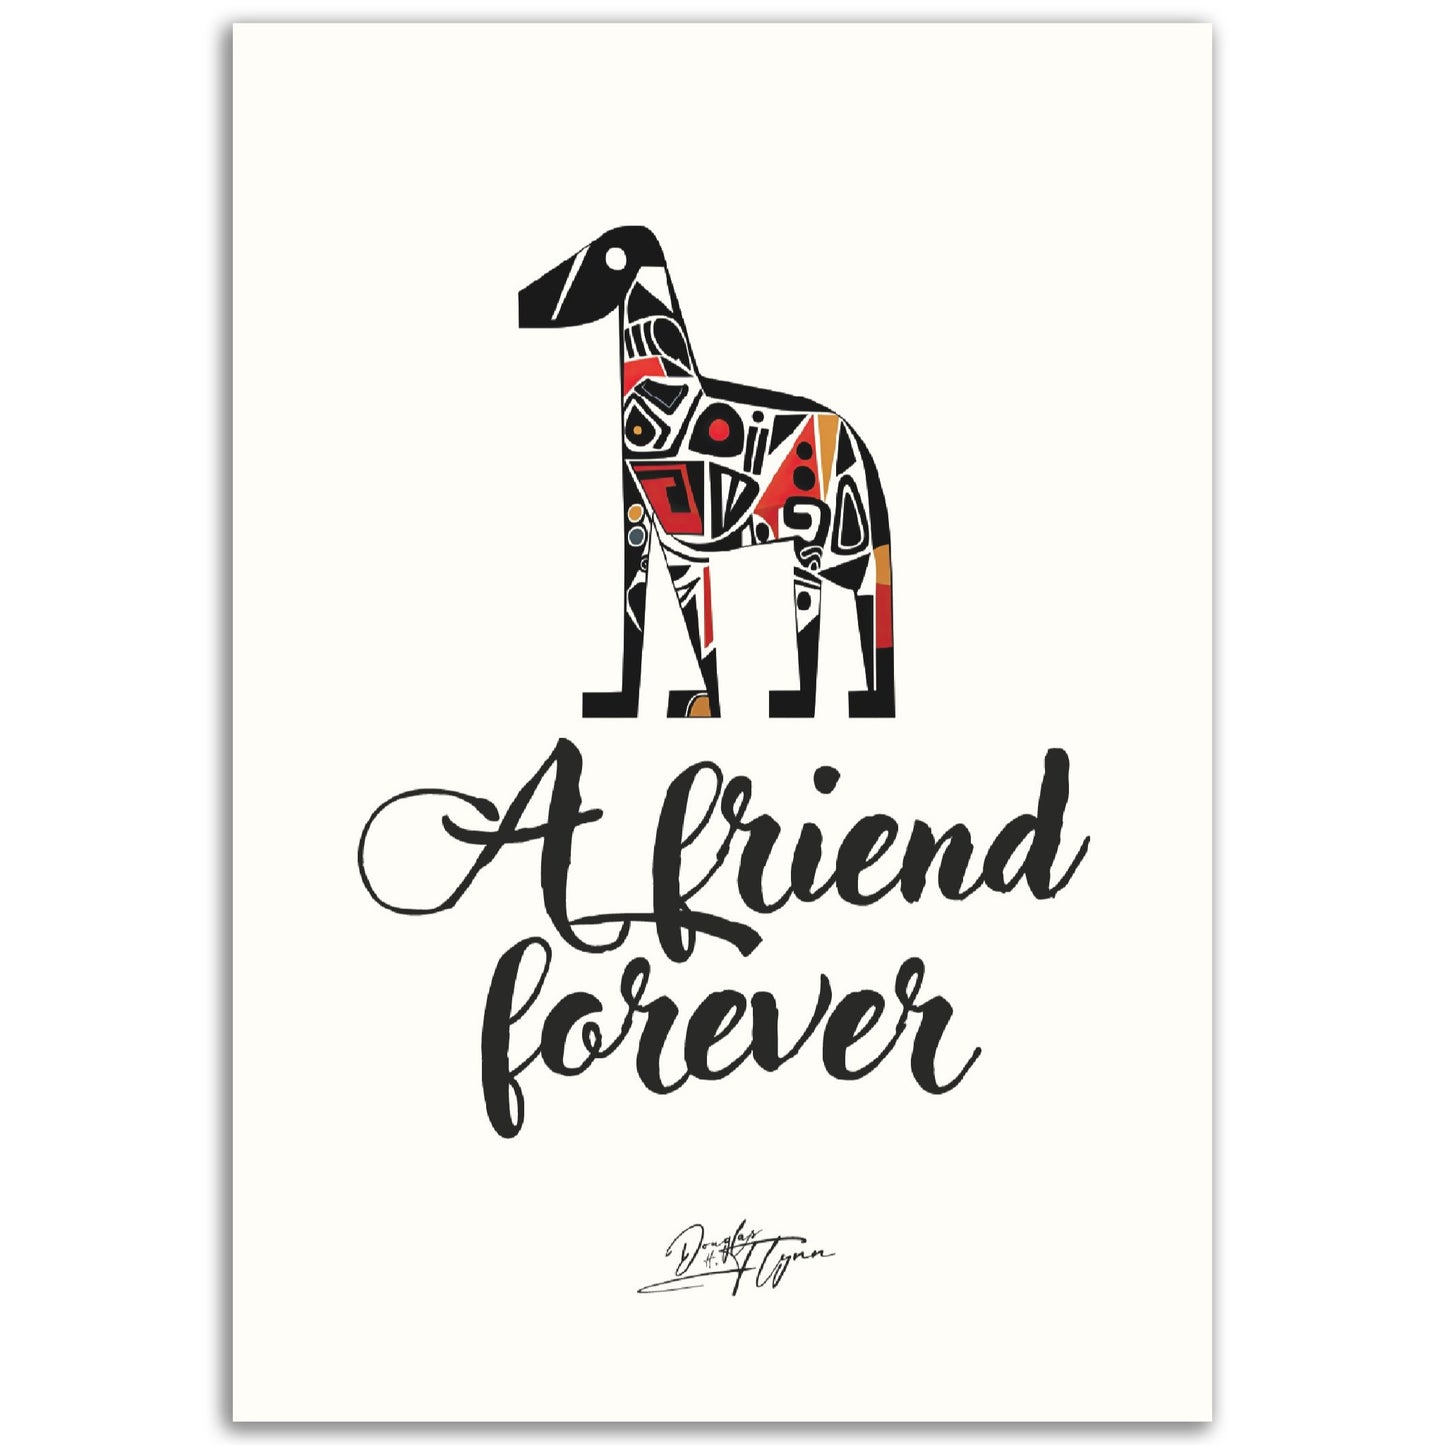 »A friend forever«